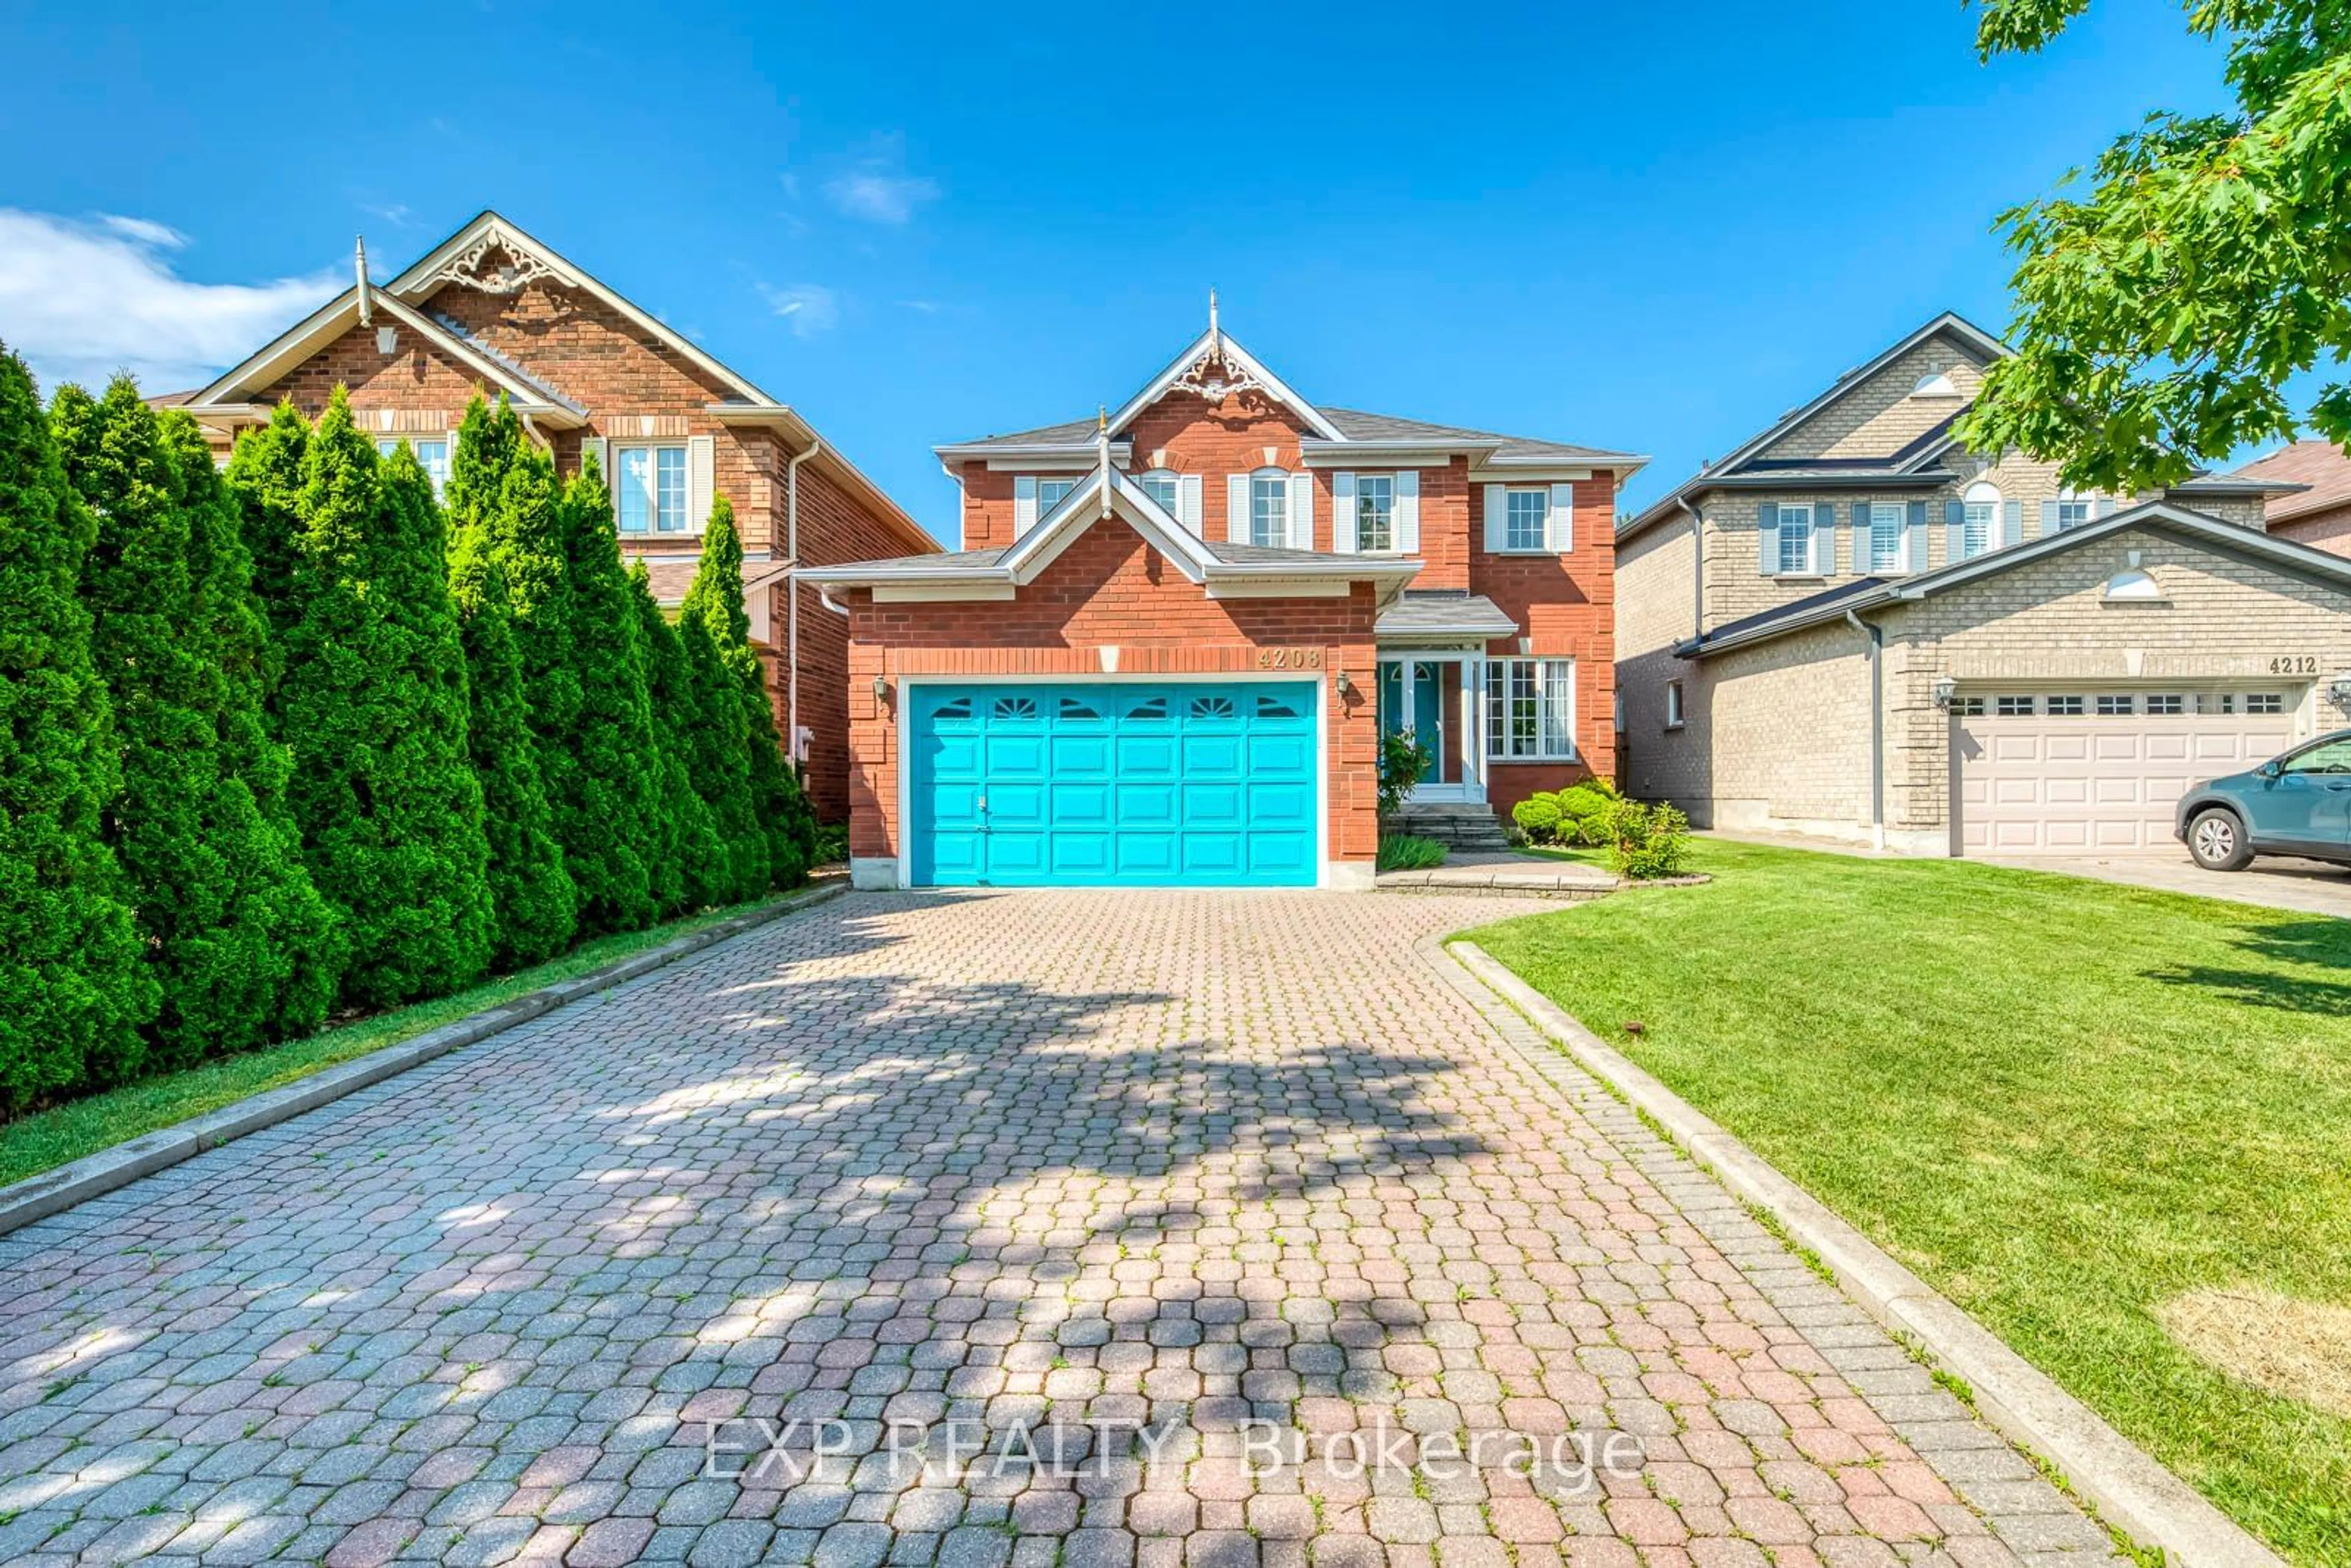 Home with brick exterior material for 4208 Sagebrush Tr, Mississauga Ontario L5C 4S1